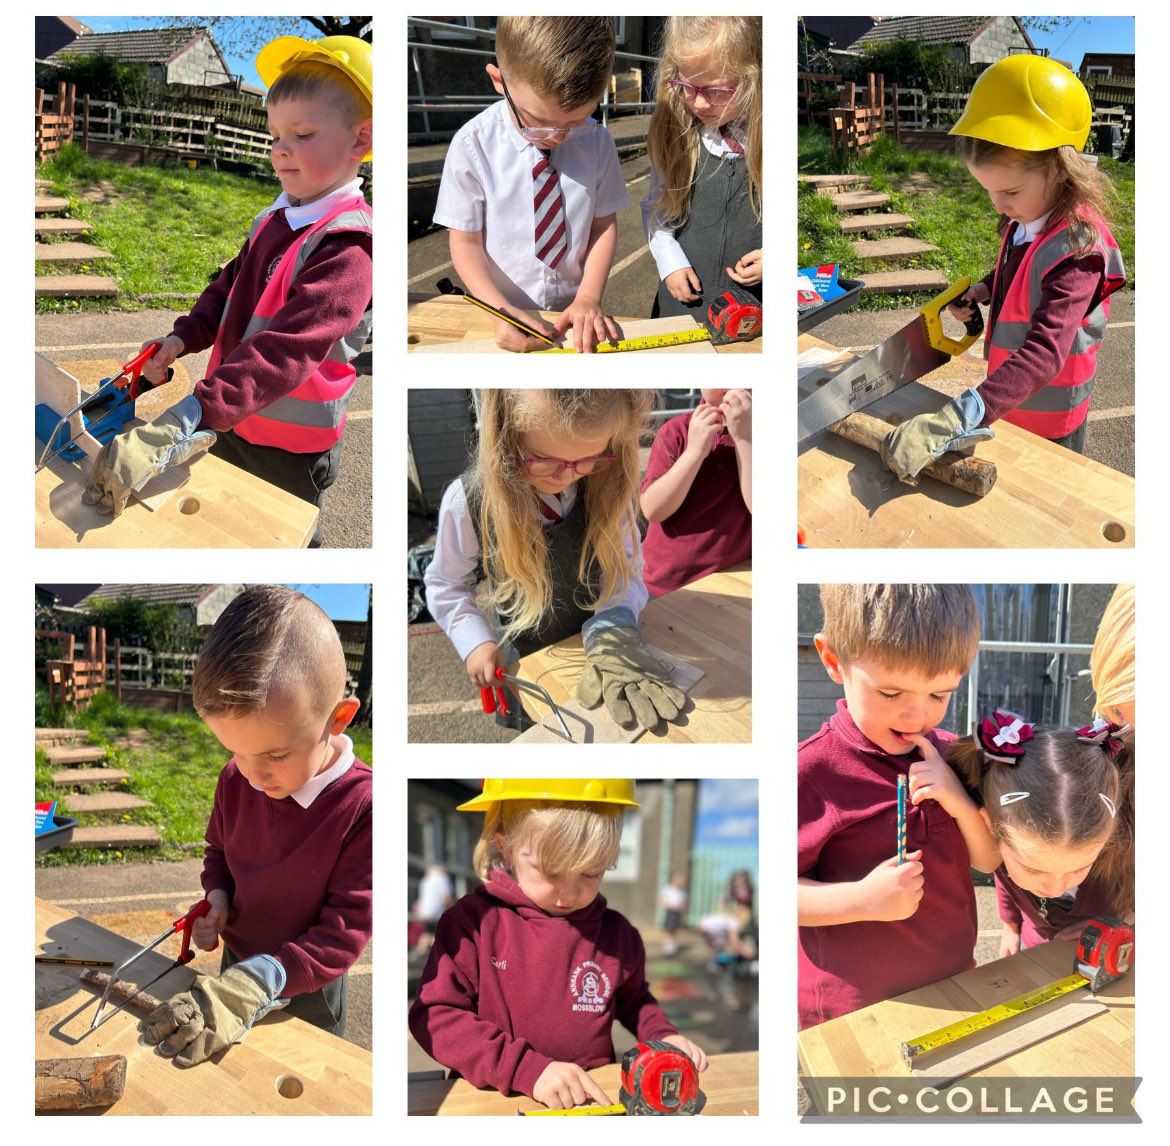 Check out our aspiring Bob the Builders… In Primary 1, we are learning about fractions. We measured and cut wood in half using a saw. 🪵🤗  #WorldOfWork #OutdoorLearning #Play #youngenquiringminds